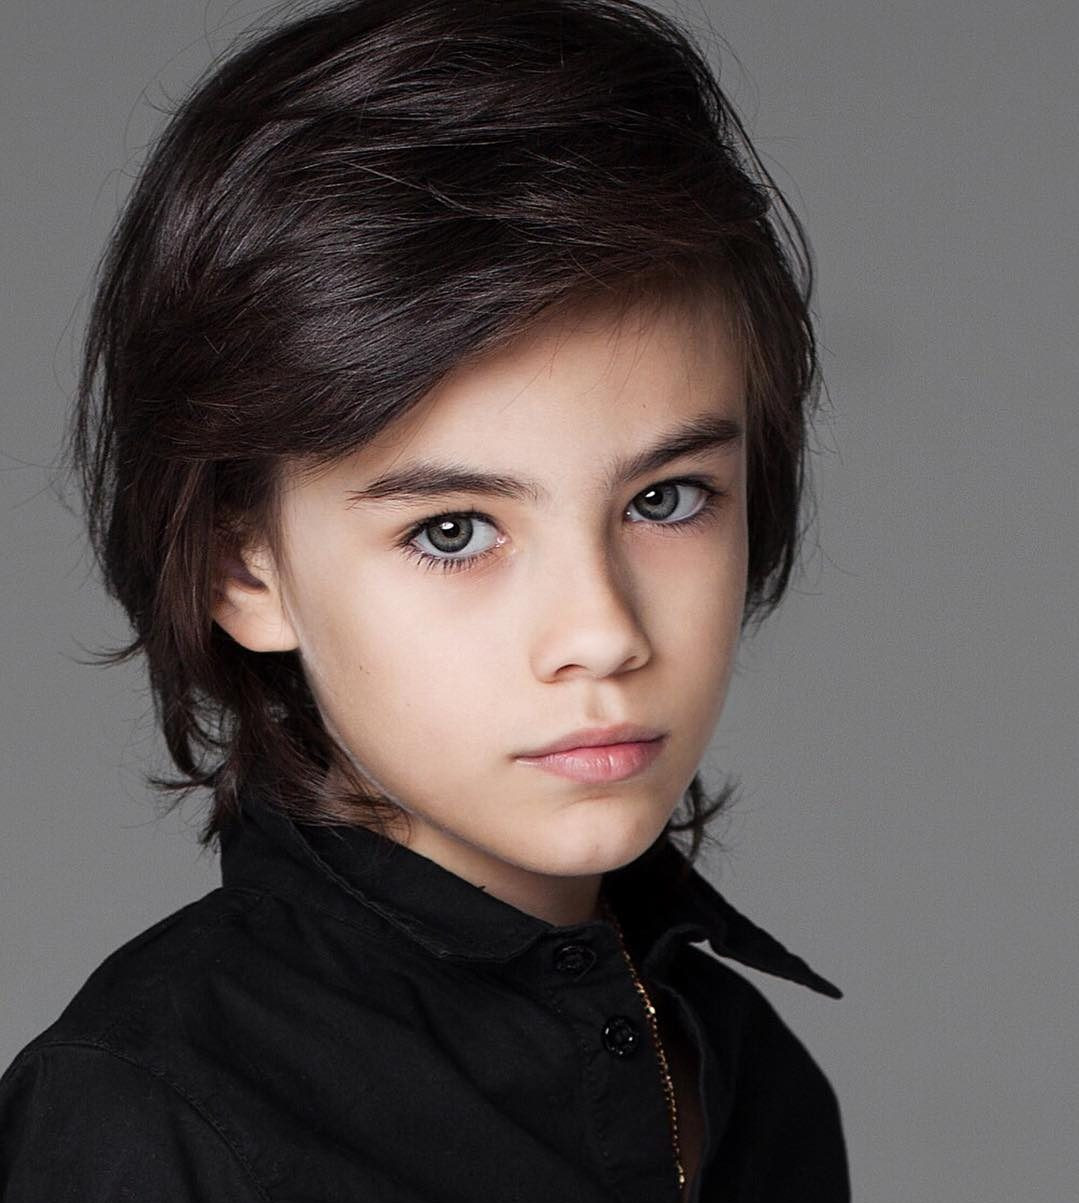 Boy Hairstyles For Long Hair
 50 Stunning Boys’ Long Hairstyles Redefining Your Kids